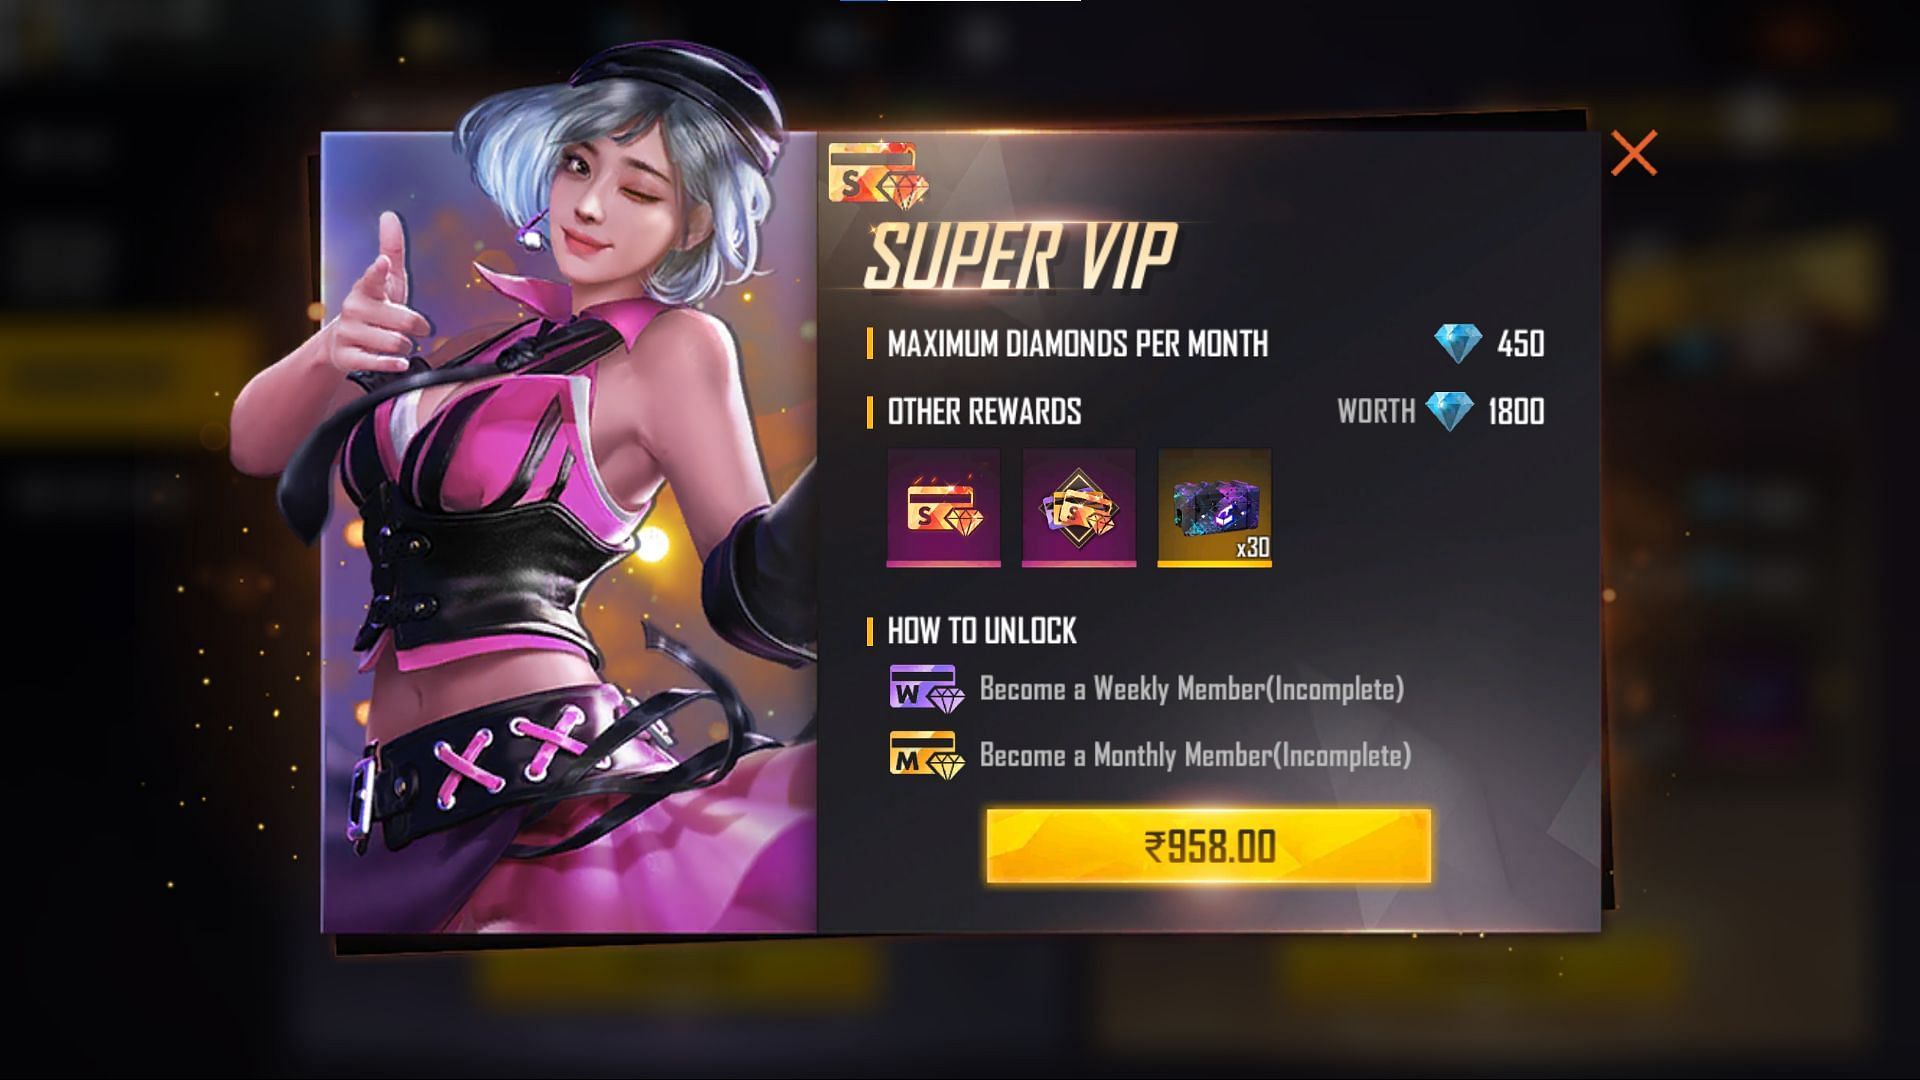 If players purchase both, they will be getting Super VIP perks (Image via Free Fire)